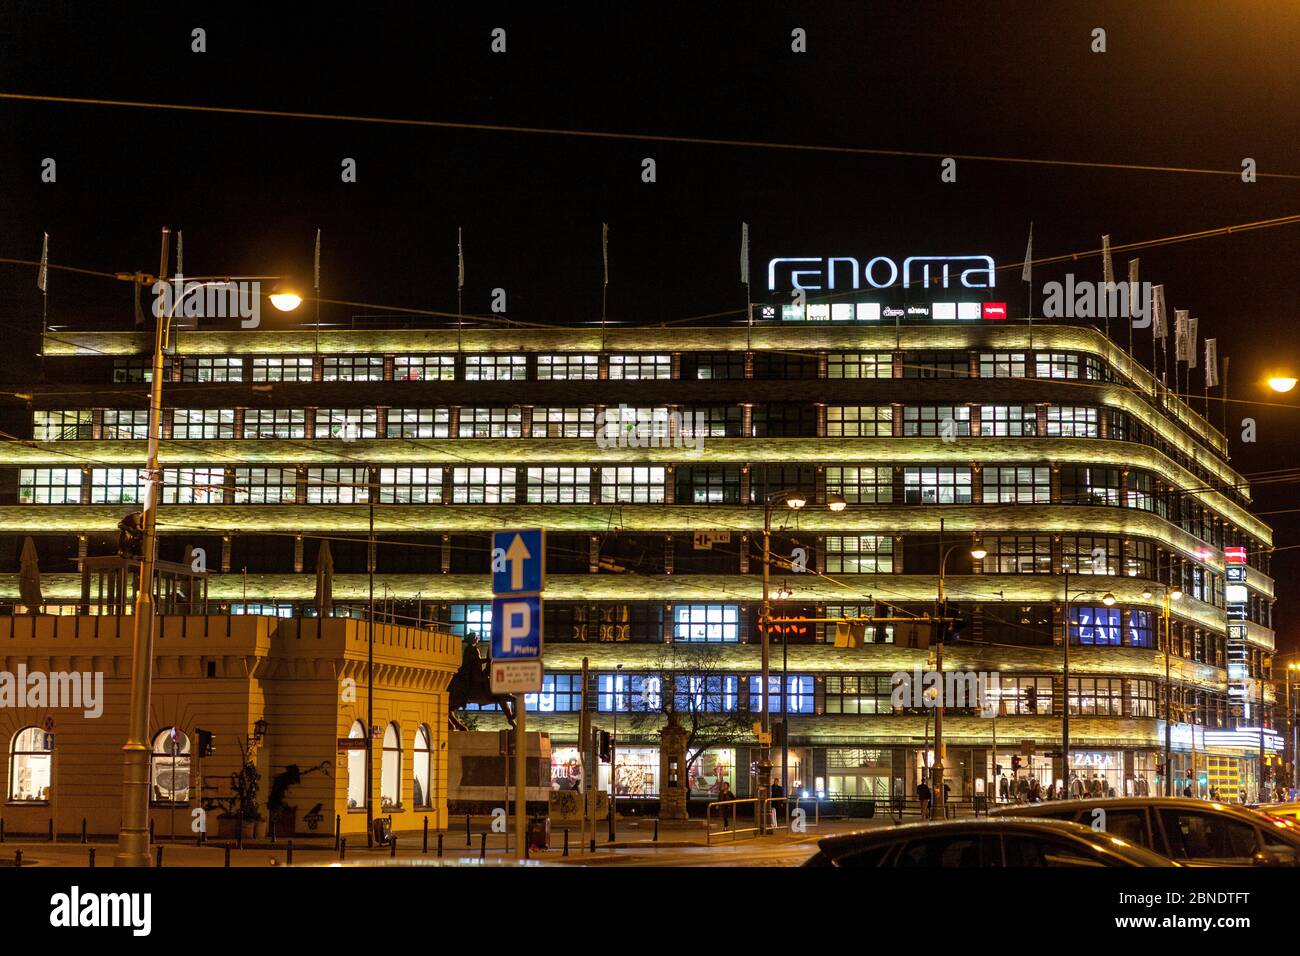 Detail of Renoma Commercial Centre at night, Wroclaw, Poland Stock Photo